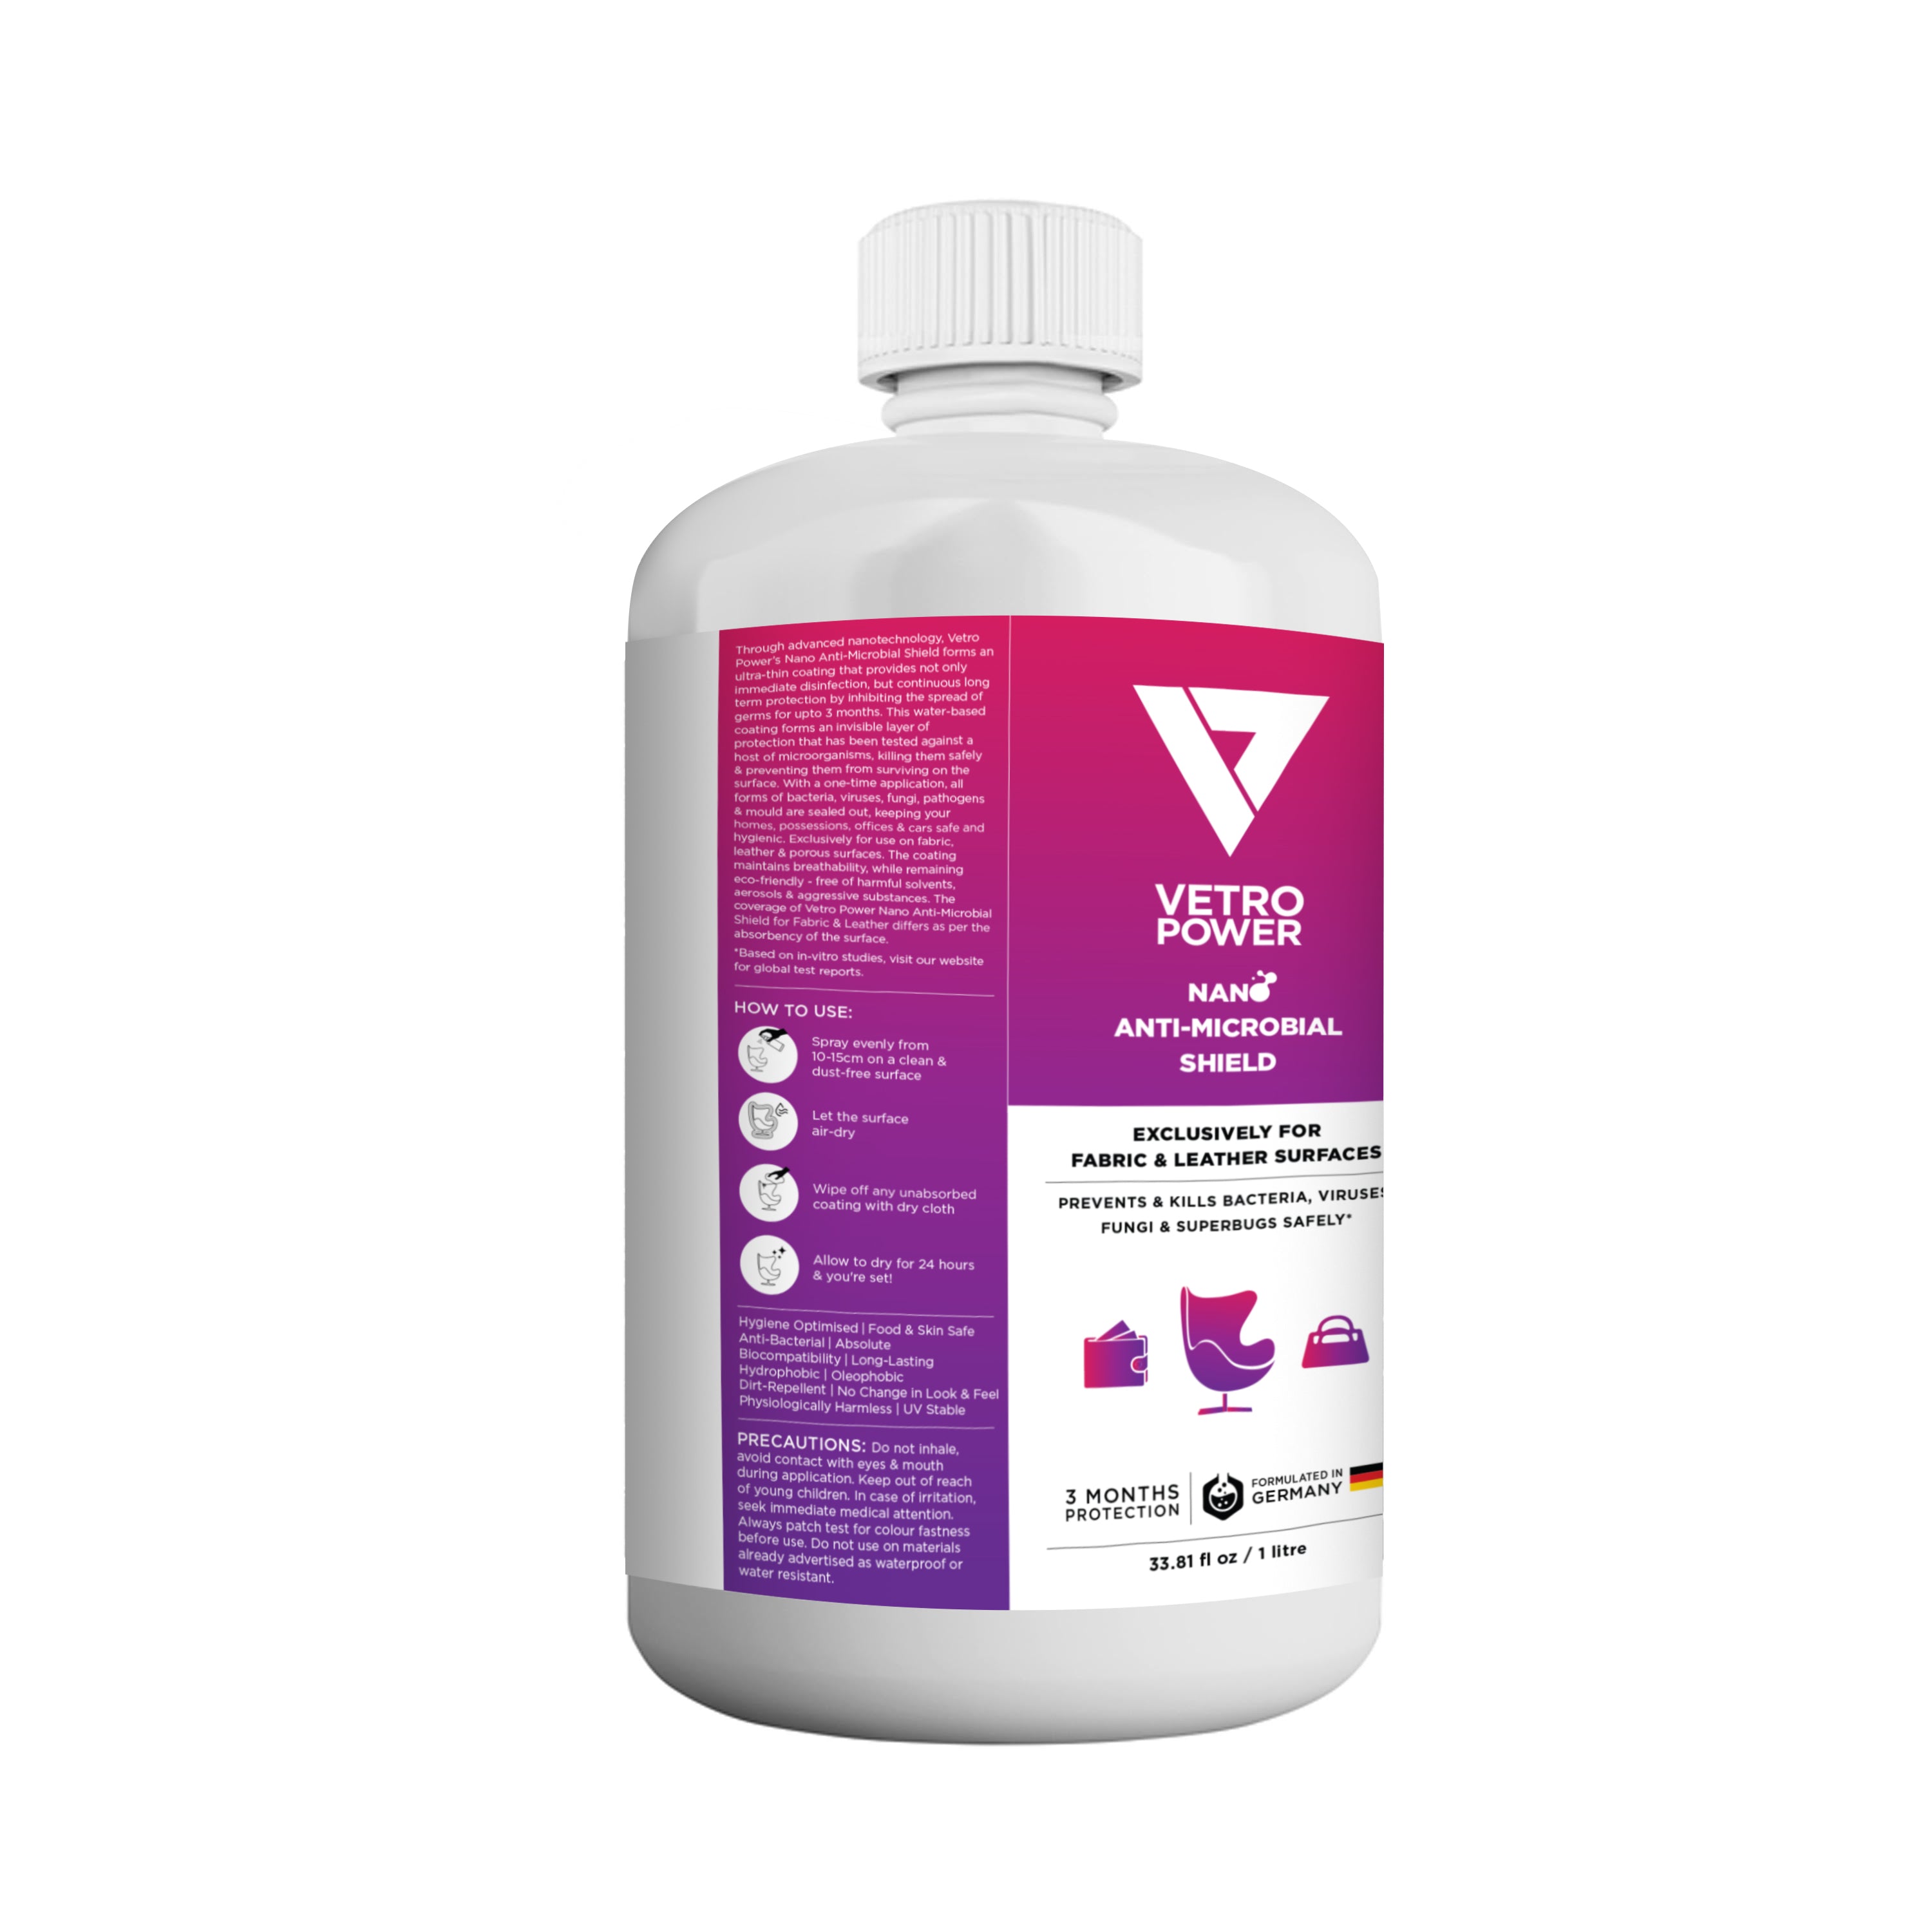 Vetro Power Nano Anti-Microbial Shield 1 Litre for Fabric & Leather Surfaces